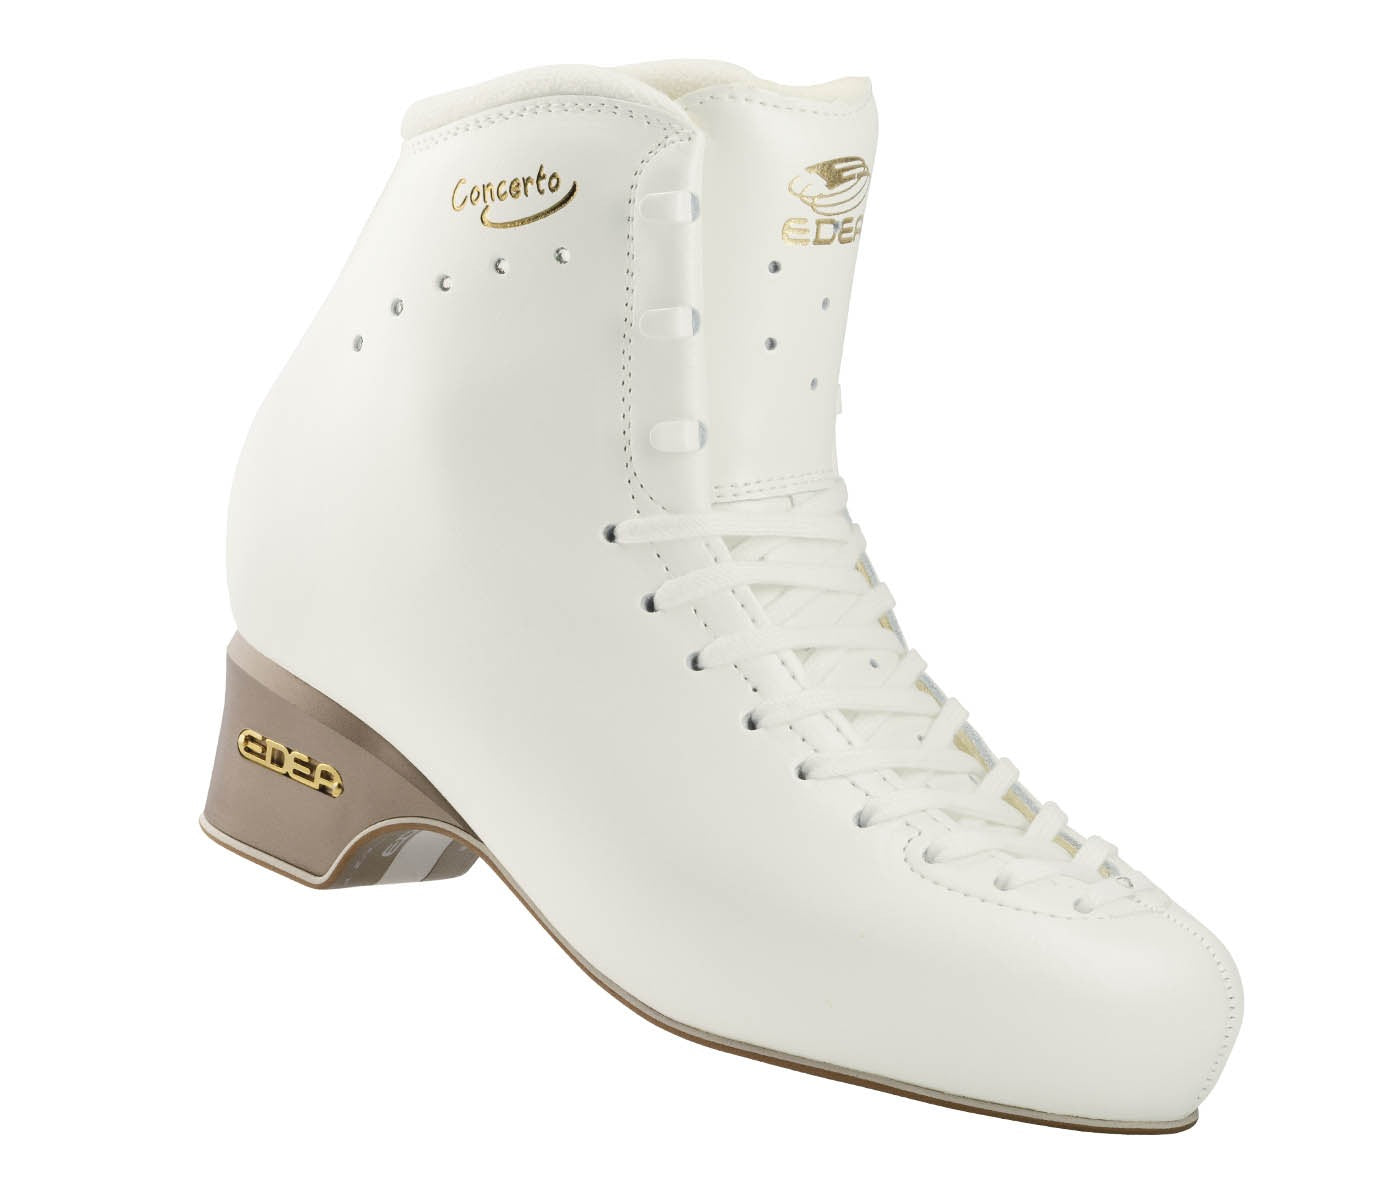 Edea Concerto Boot Only in Ivory. Senior Sizes 260 - 290